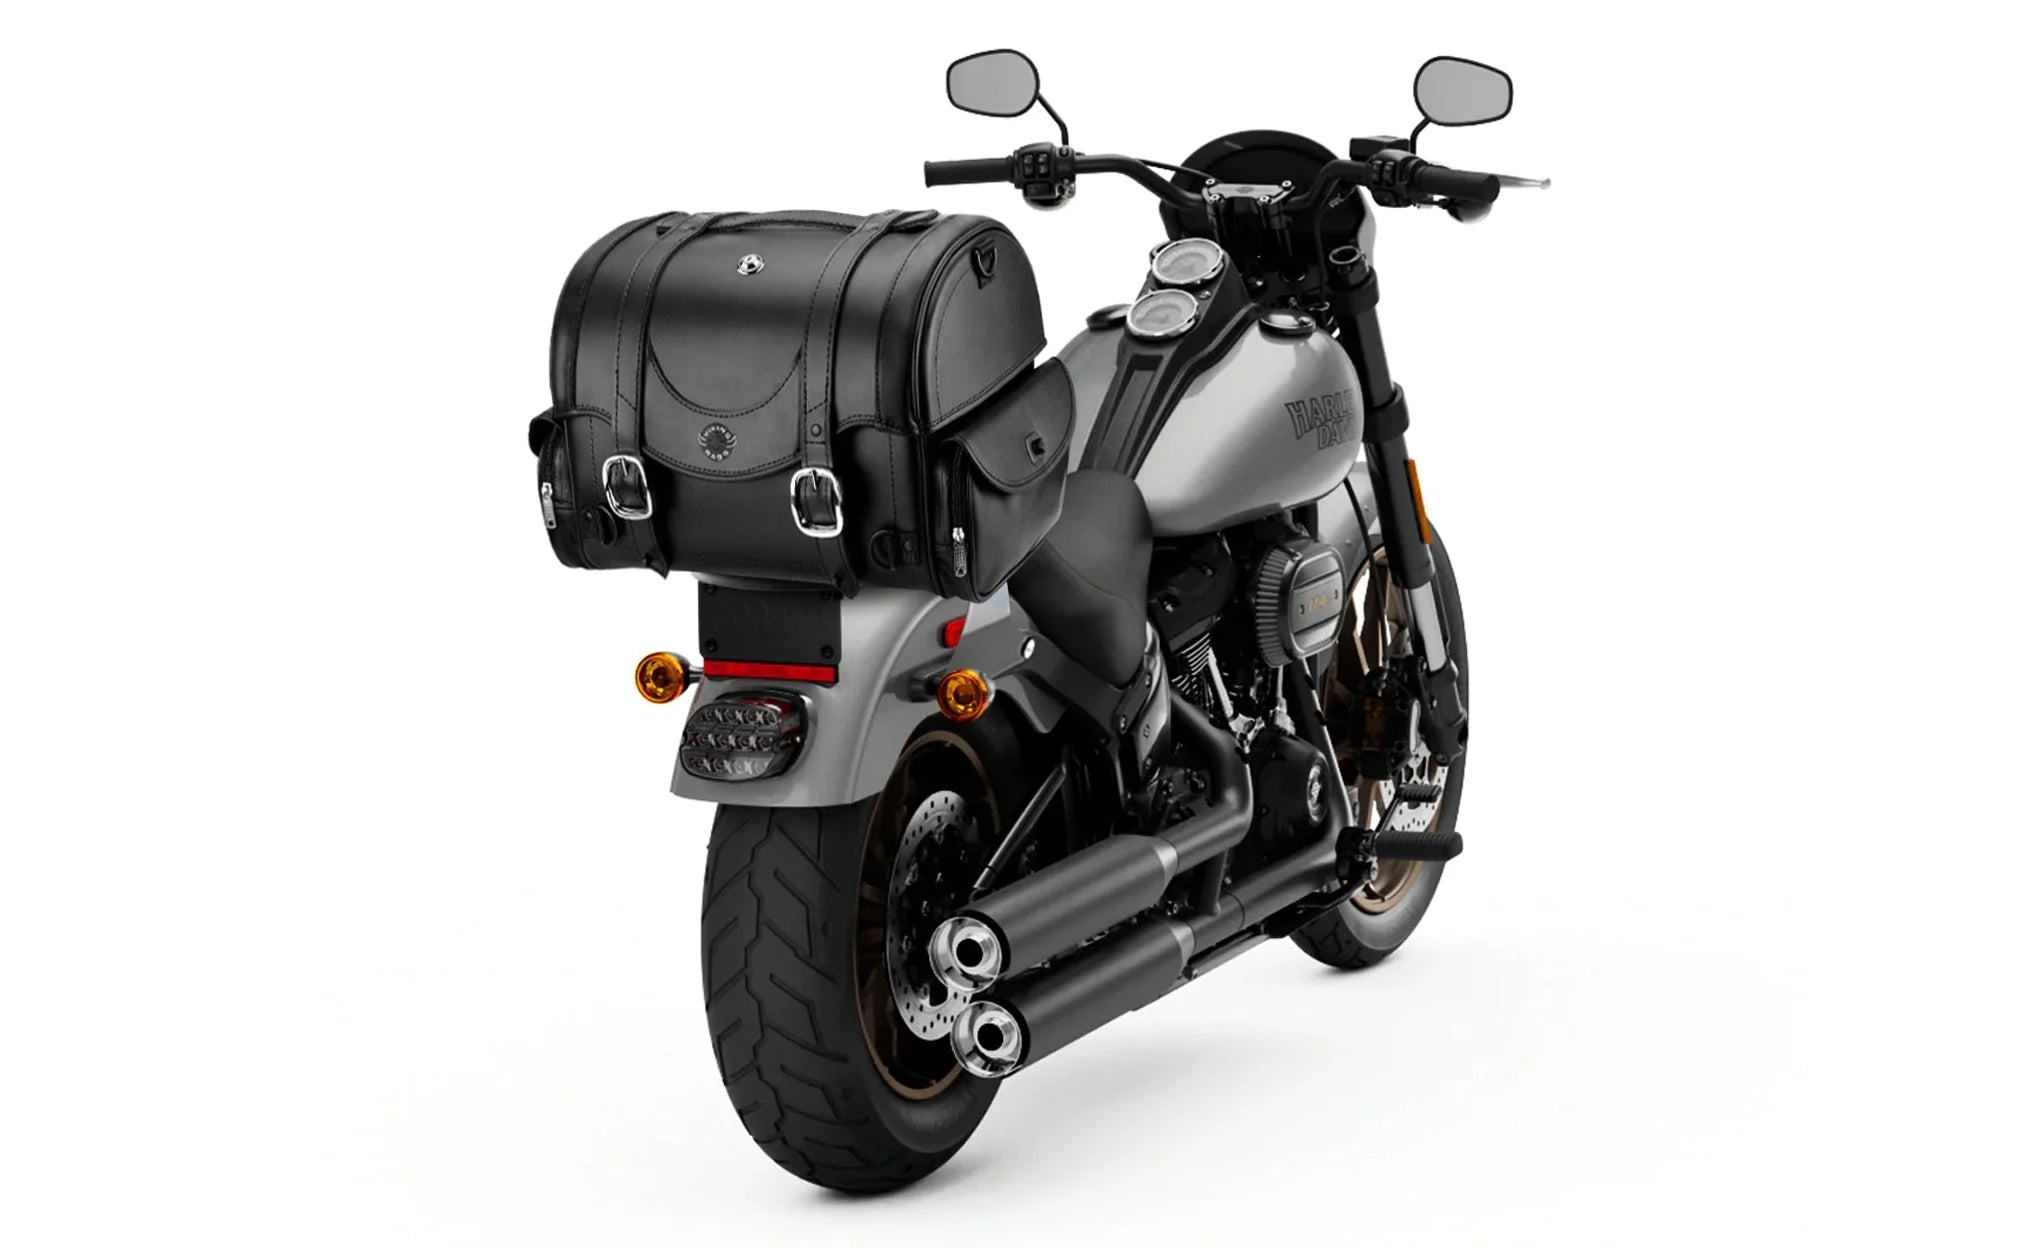 21L - Century Medium Victory Leather Motorcycle Tail Bag on Bike Photo @expand